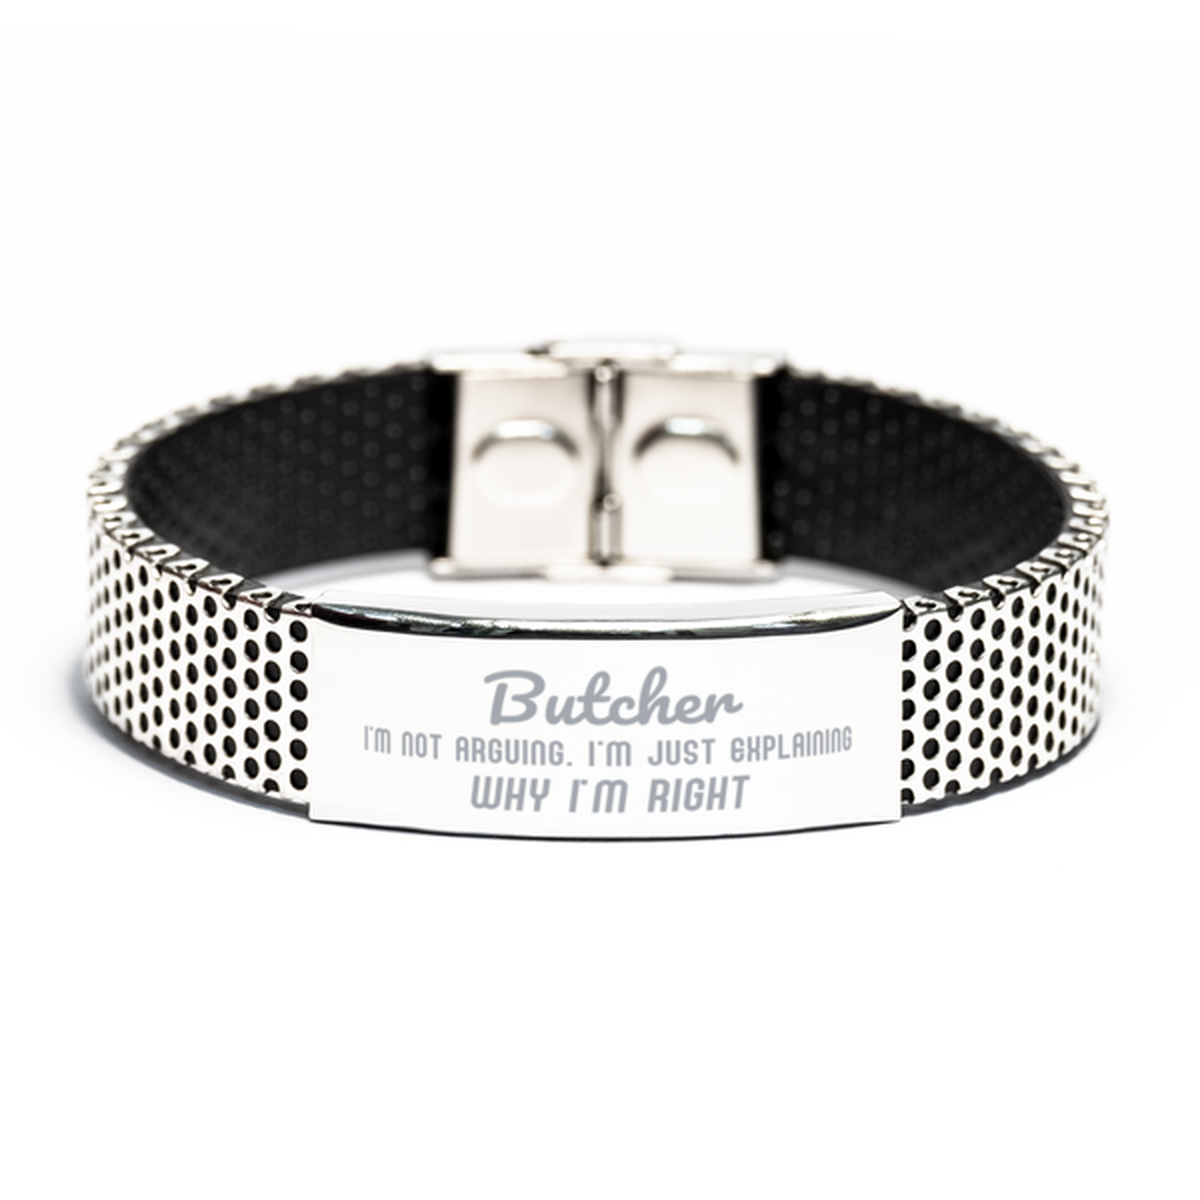 Butcher I'm not Arguing. I'm Just Explaining Why I'm RIGHT Stainless Steel Bracelet, Funny Saying Quote Butcher Gifts For Butcher Graduation Birthday Christmas Gifts for Men Women Coworker